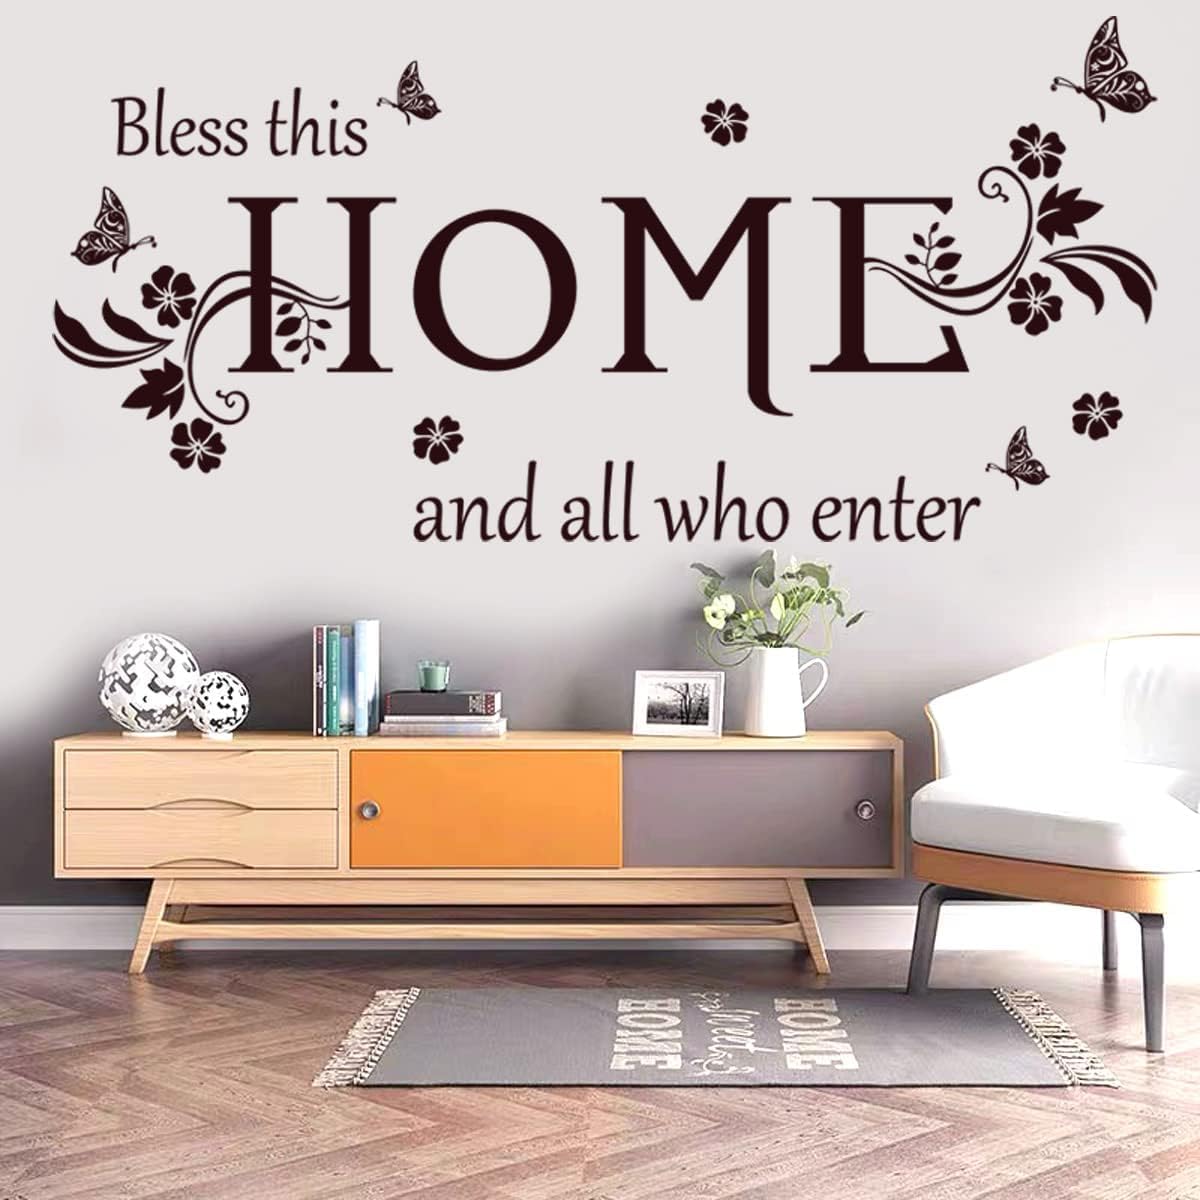 Wall Decals Wall Decor Sticker Quote Bless This Home and All who Enter Removable Mural Wall Stickers for Living Room Dining Room Bedroom Entryway Family Home Decoration (Brown)